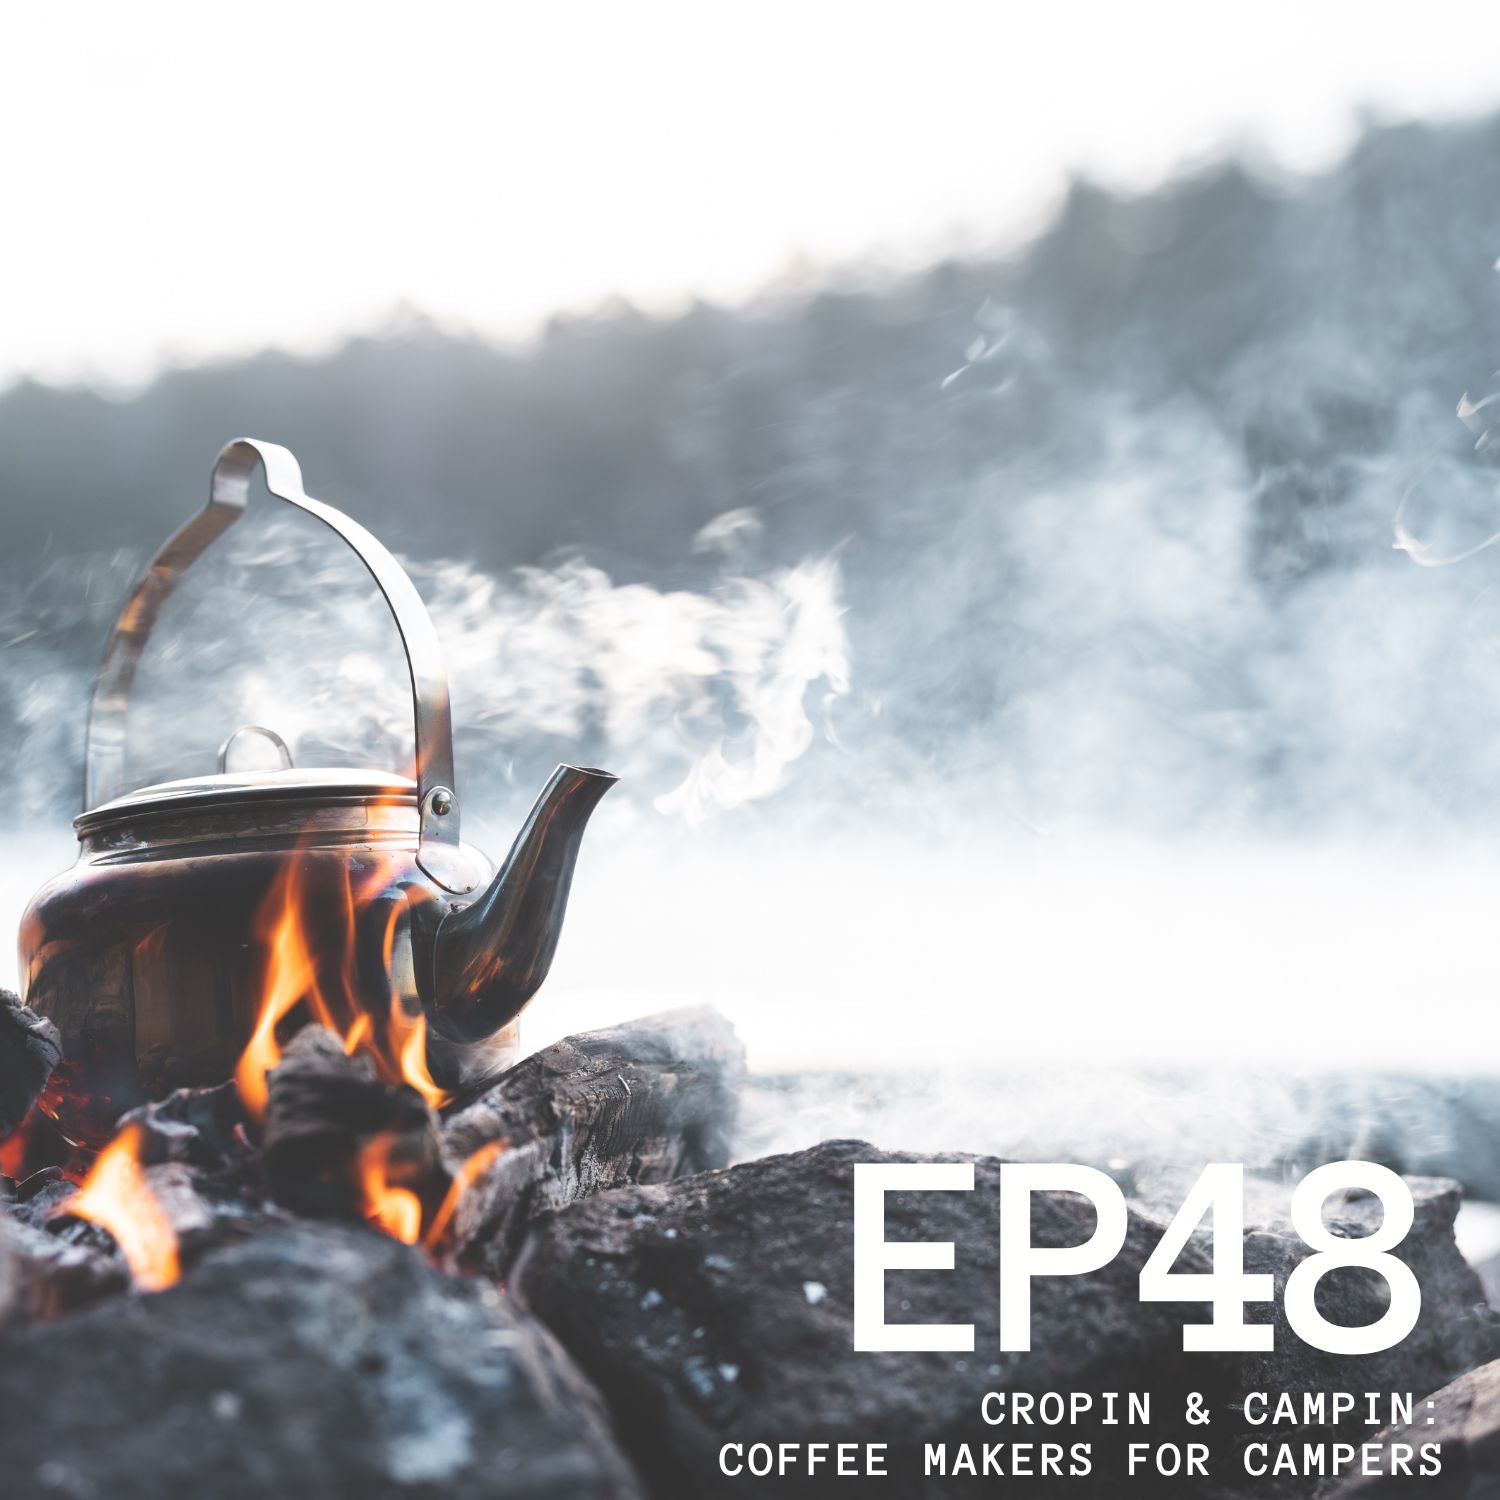 Episode 48 - Cropin & Campin: Coffee Makers For Campers